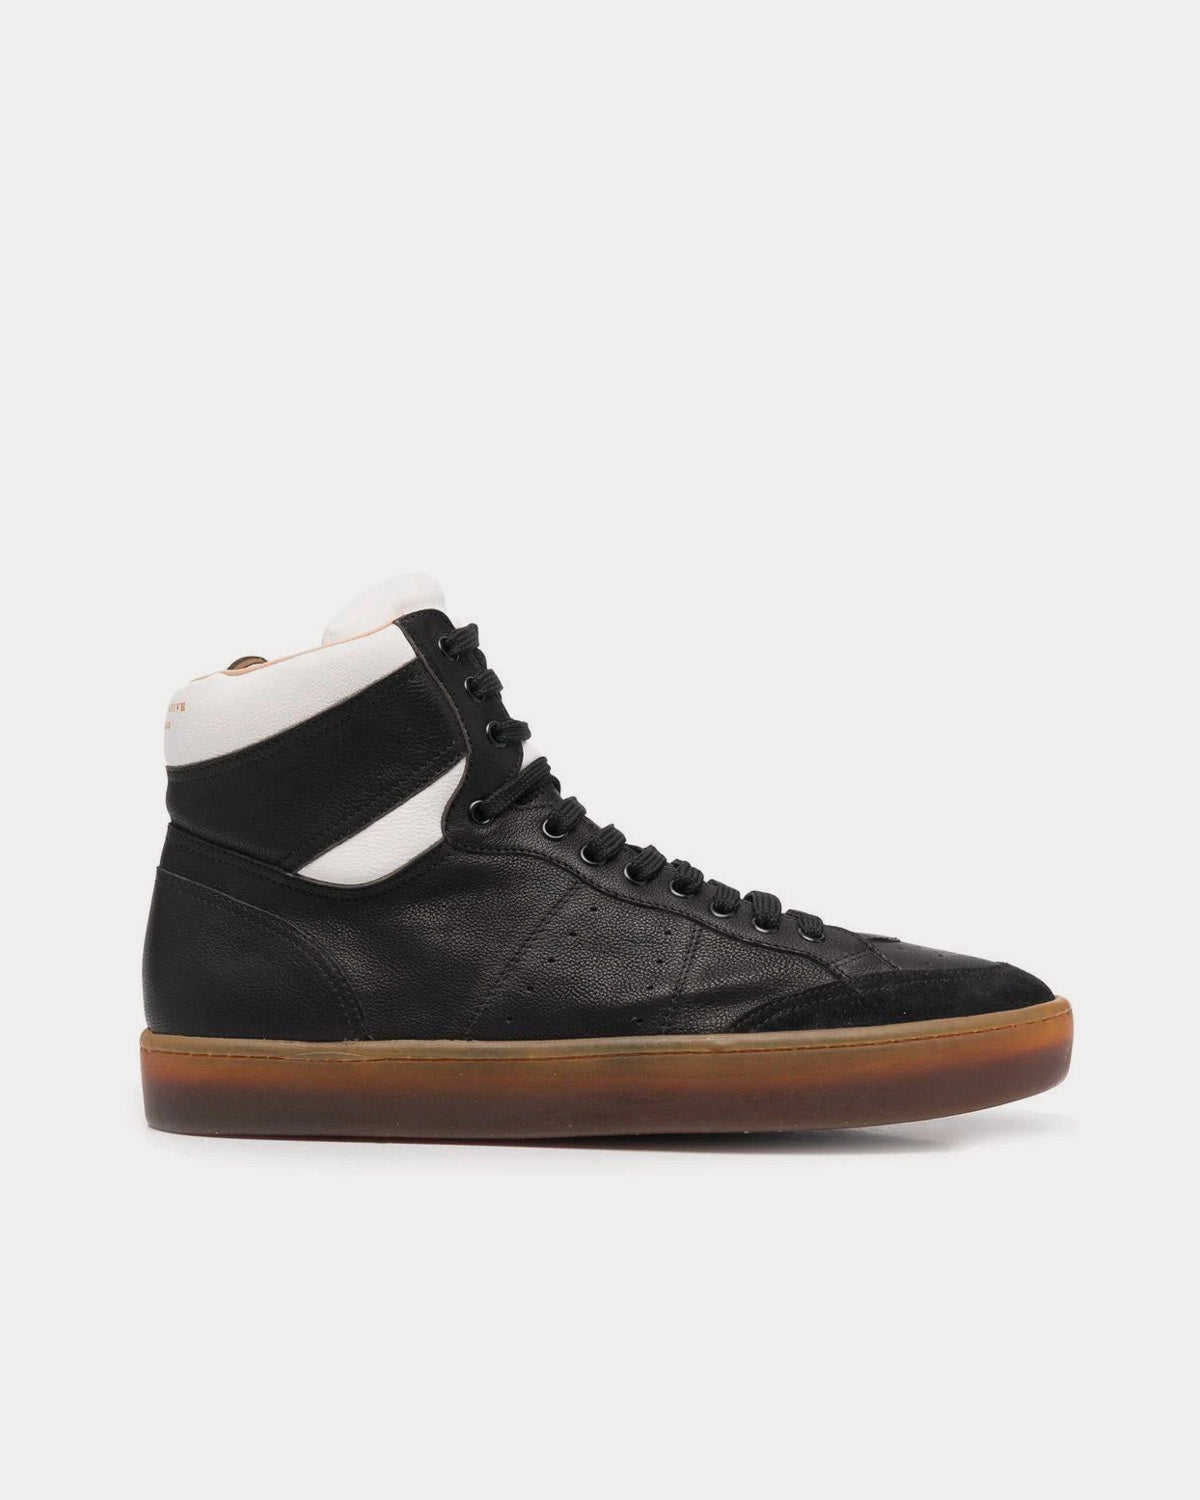 Officine Creative - Knight 005 Black / White High Top Sneakers